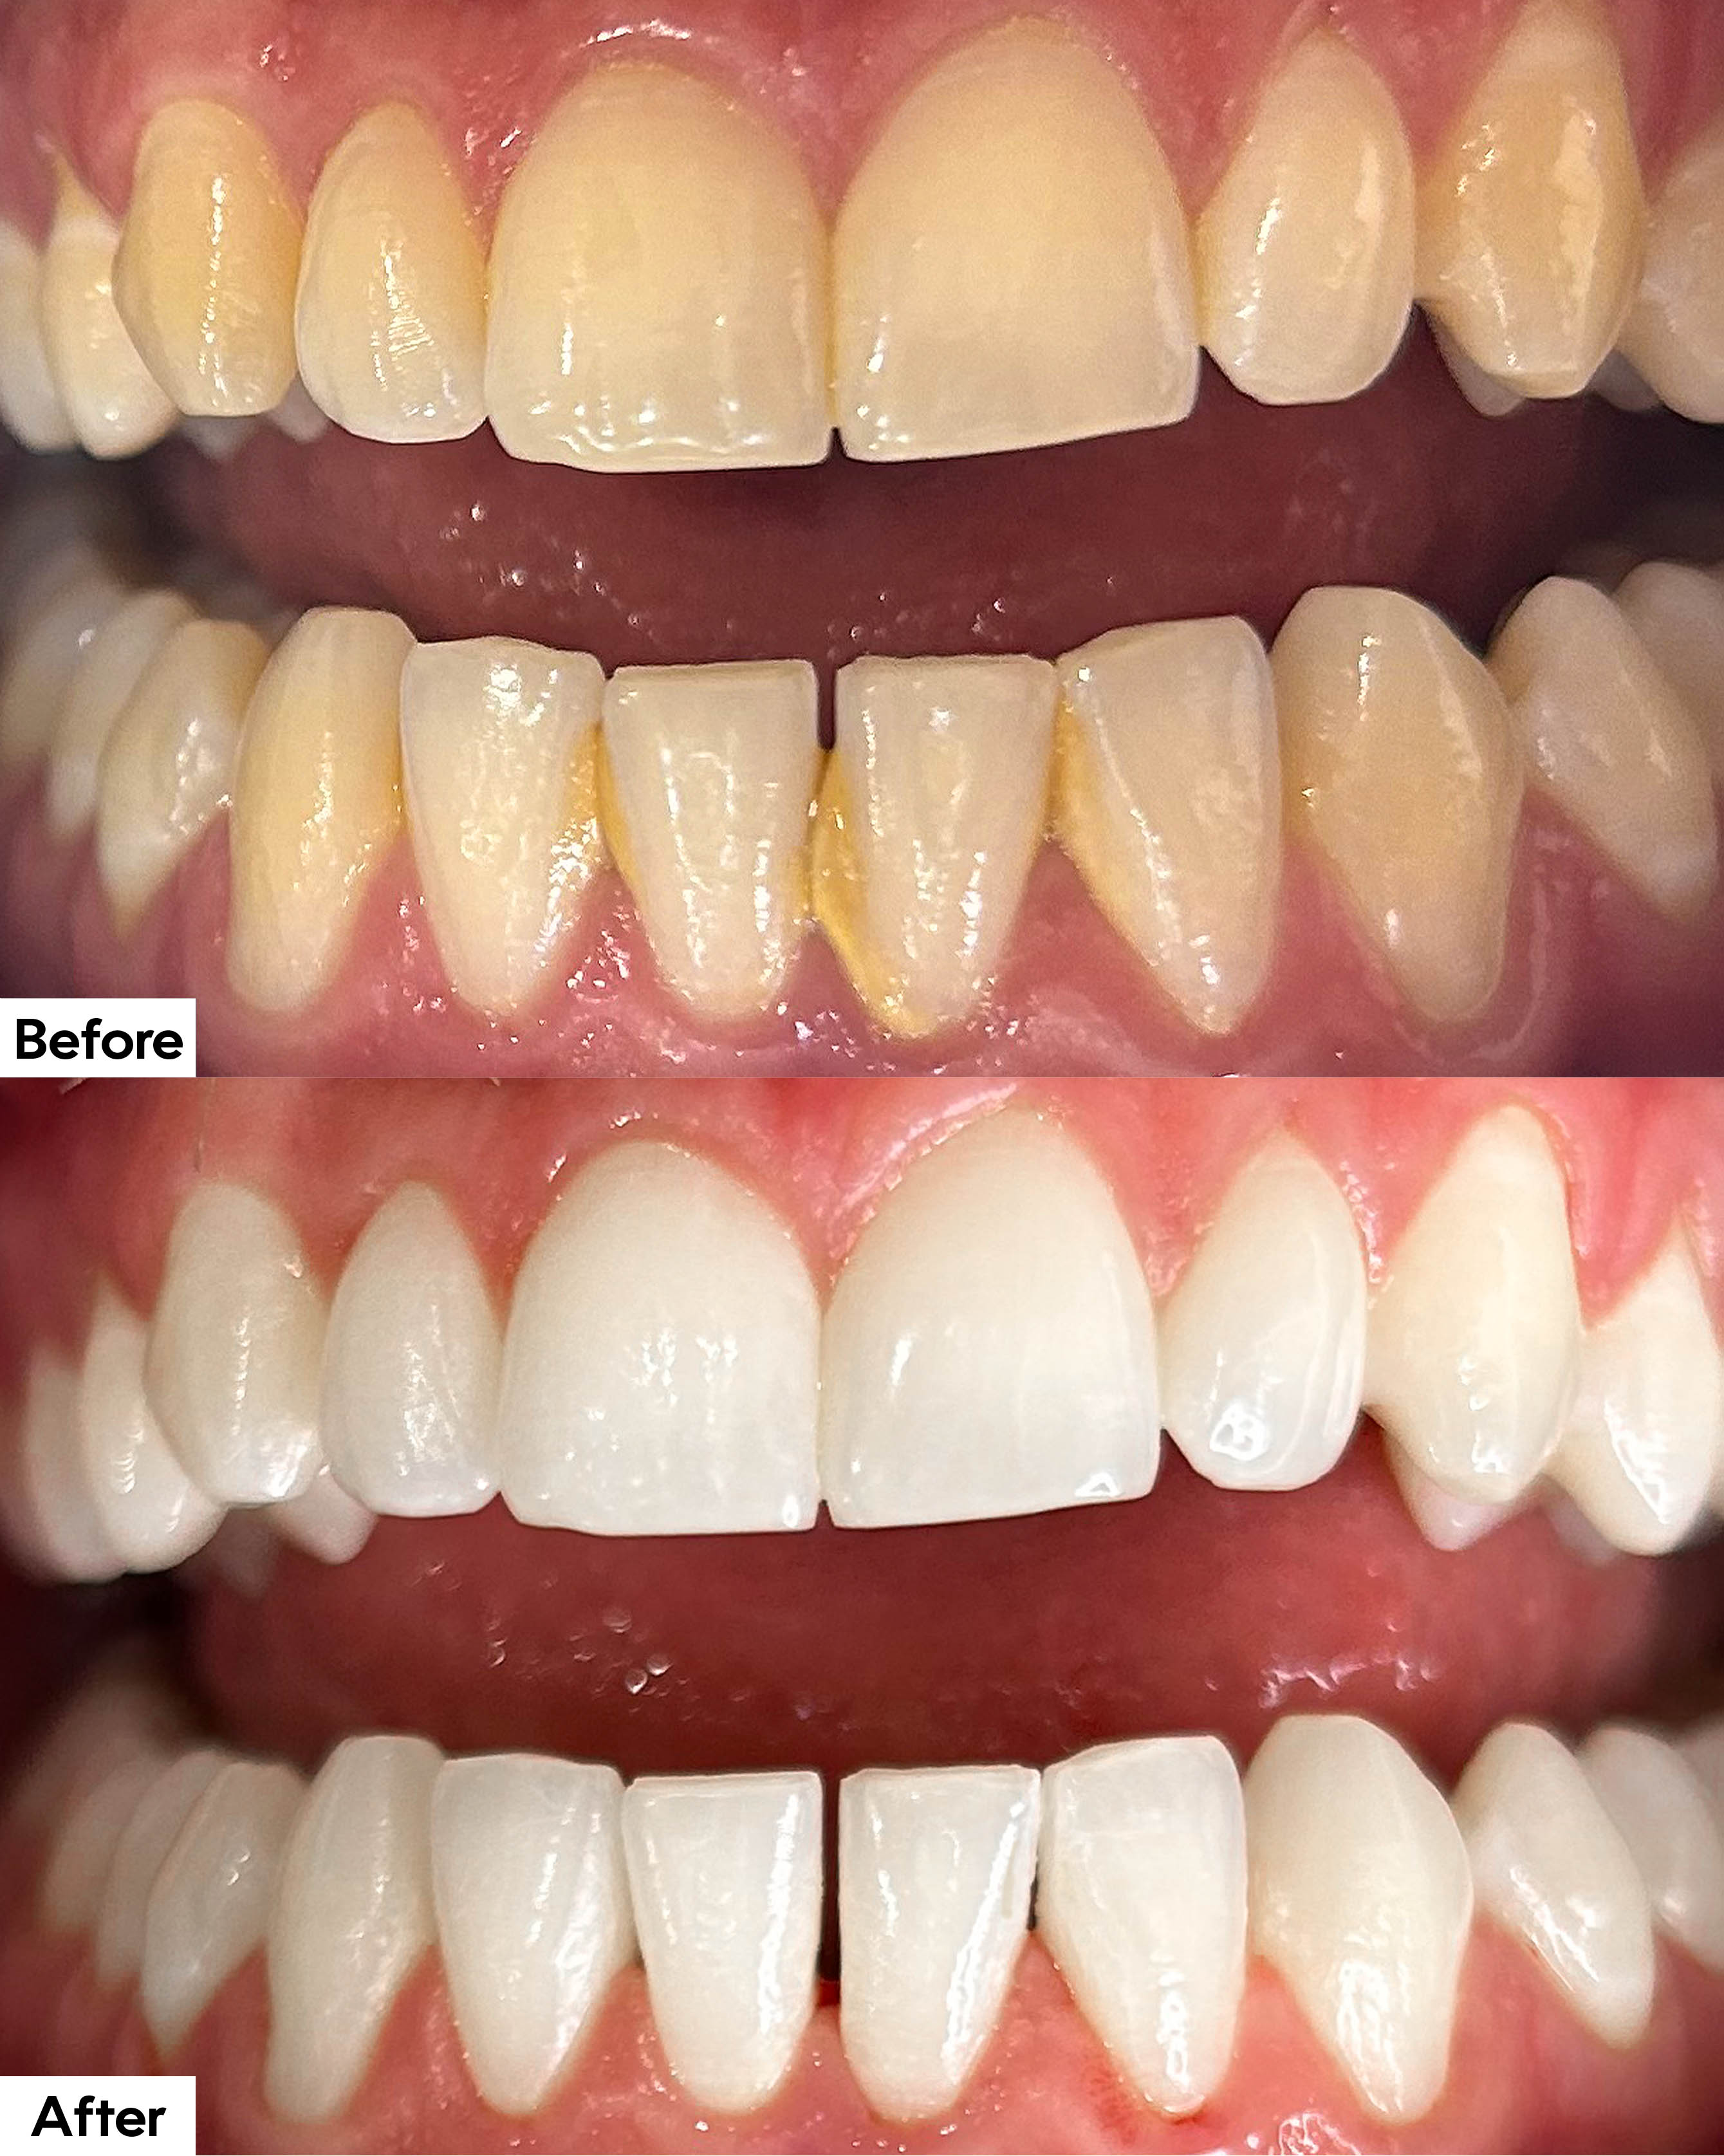 Boutique whitening before and after images